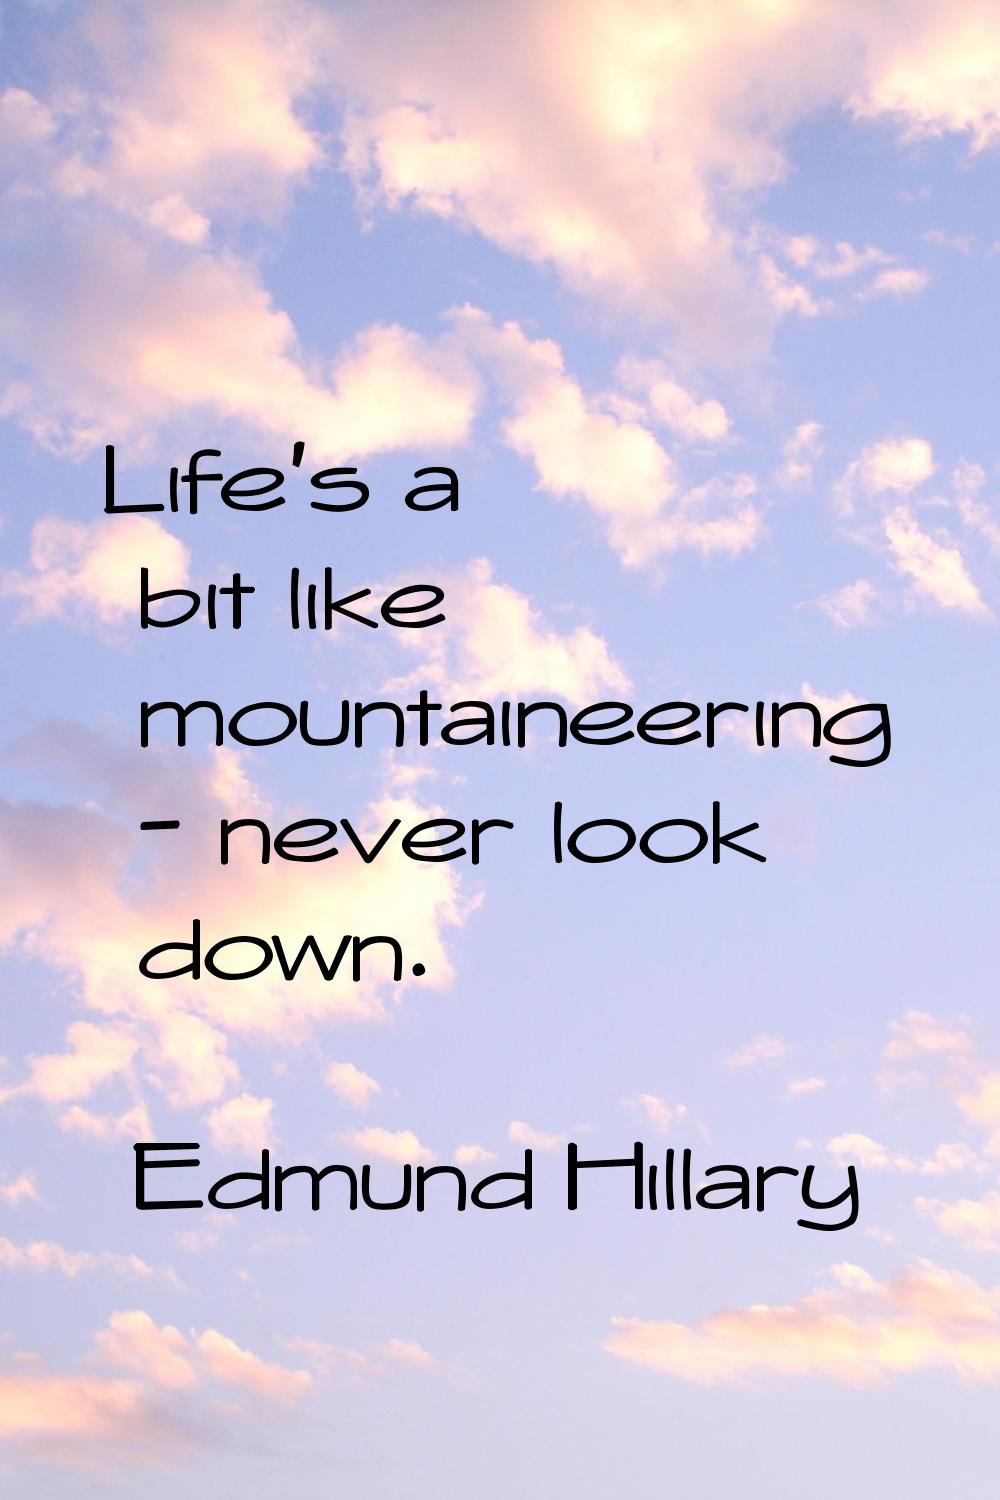 Life's a bit like mountaineering - never look down.